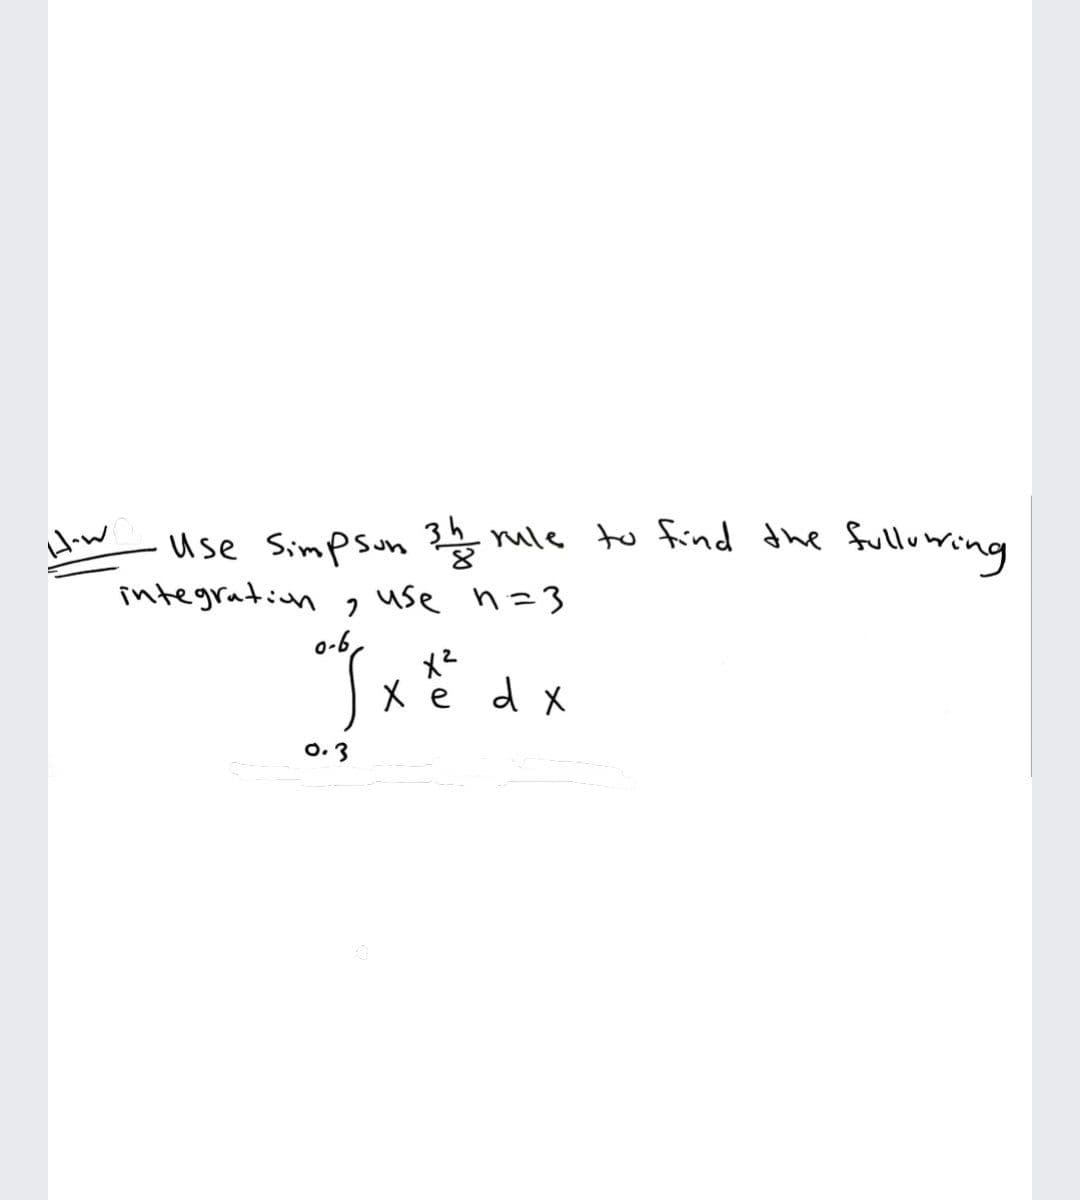 How
use Simpsun mle to find the
integration 2 use n=3
fulluring
o-6,
メ2
d x
X e
0. 3
